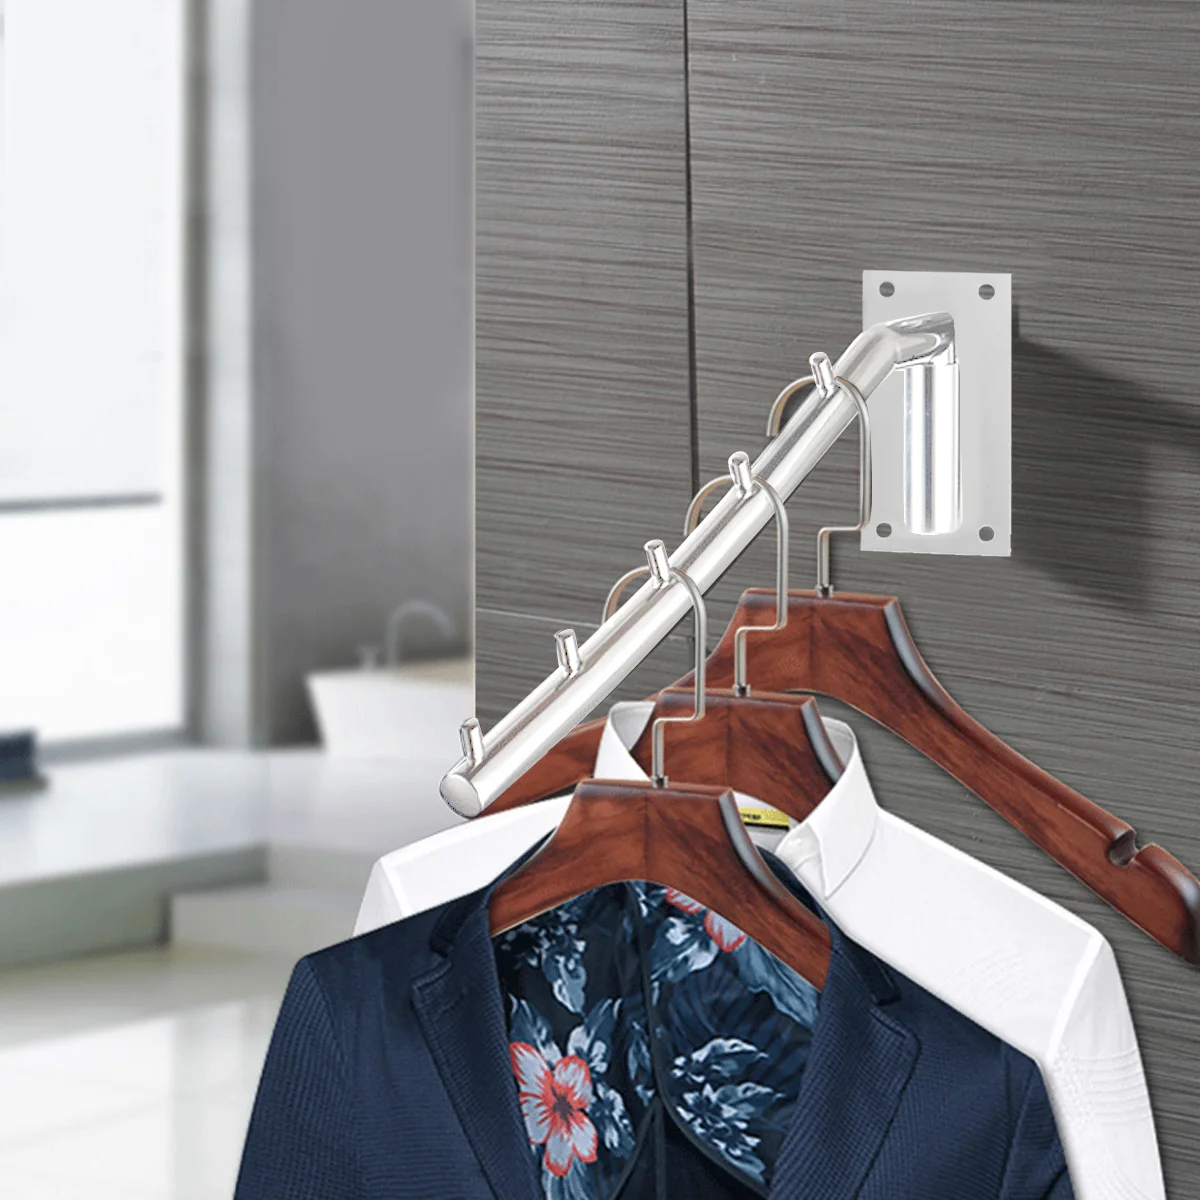 

Clothes Wall Hanger Closet Hanging Mounted Rack Board Rods Racks Laundry Ironing Mount Folding Hooks Systems